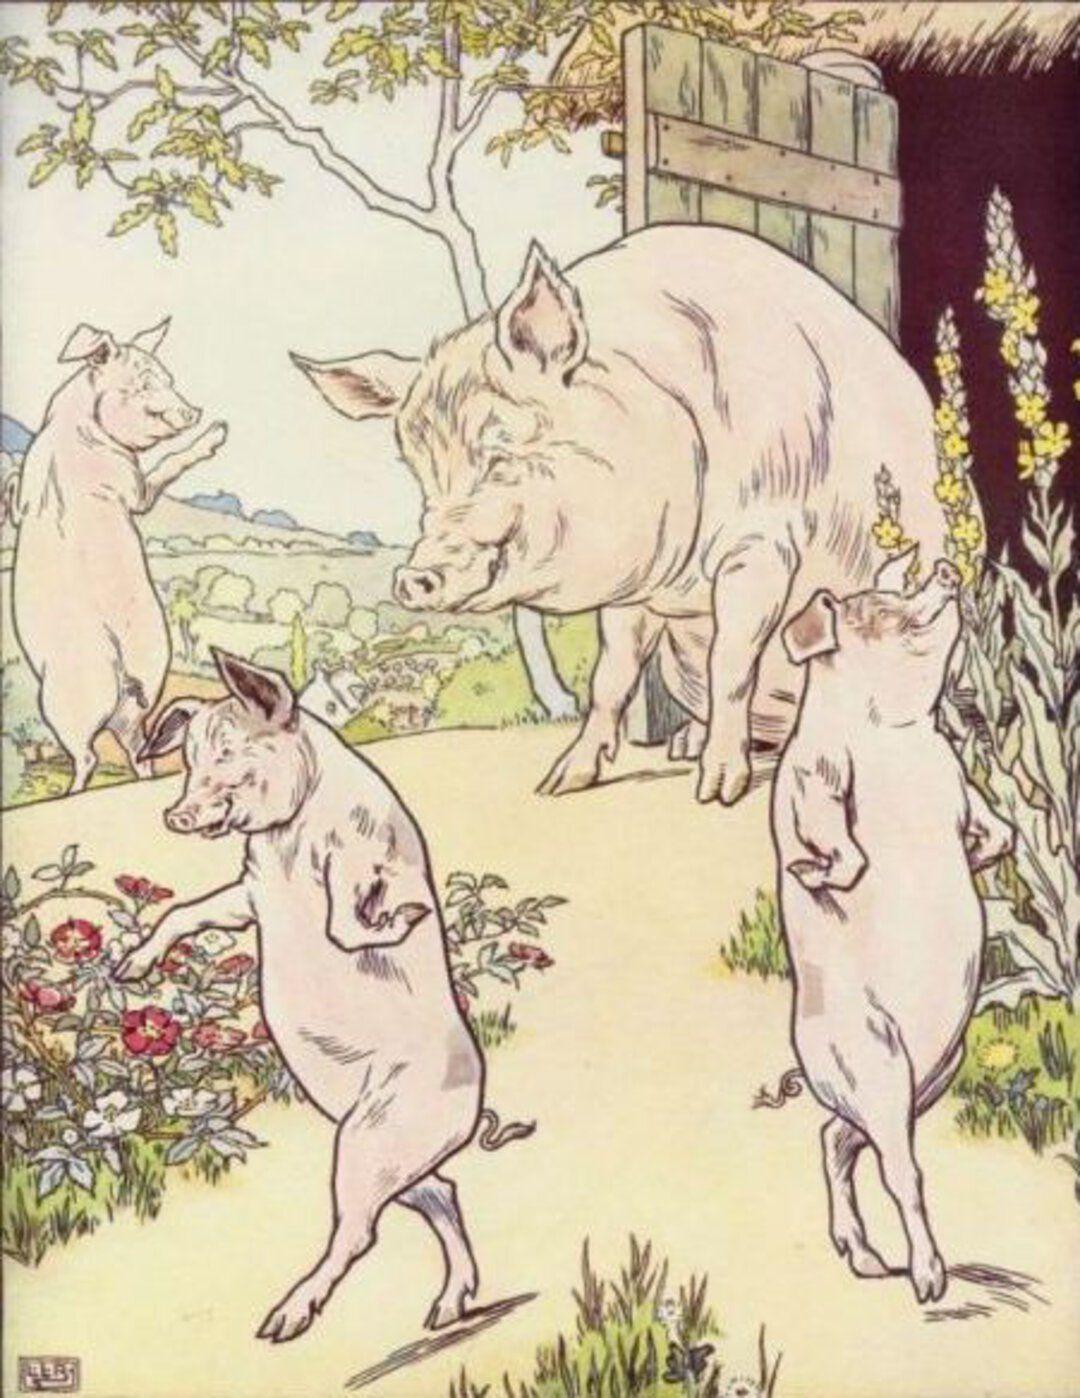 The Three Little Pigs #1 image number 2